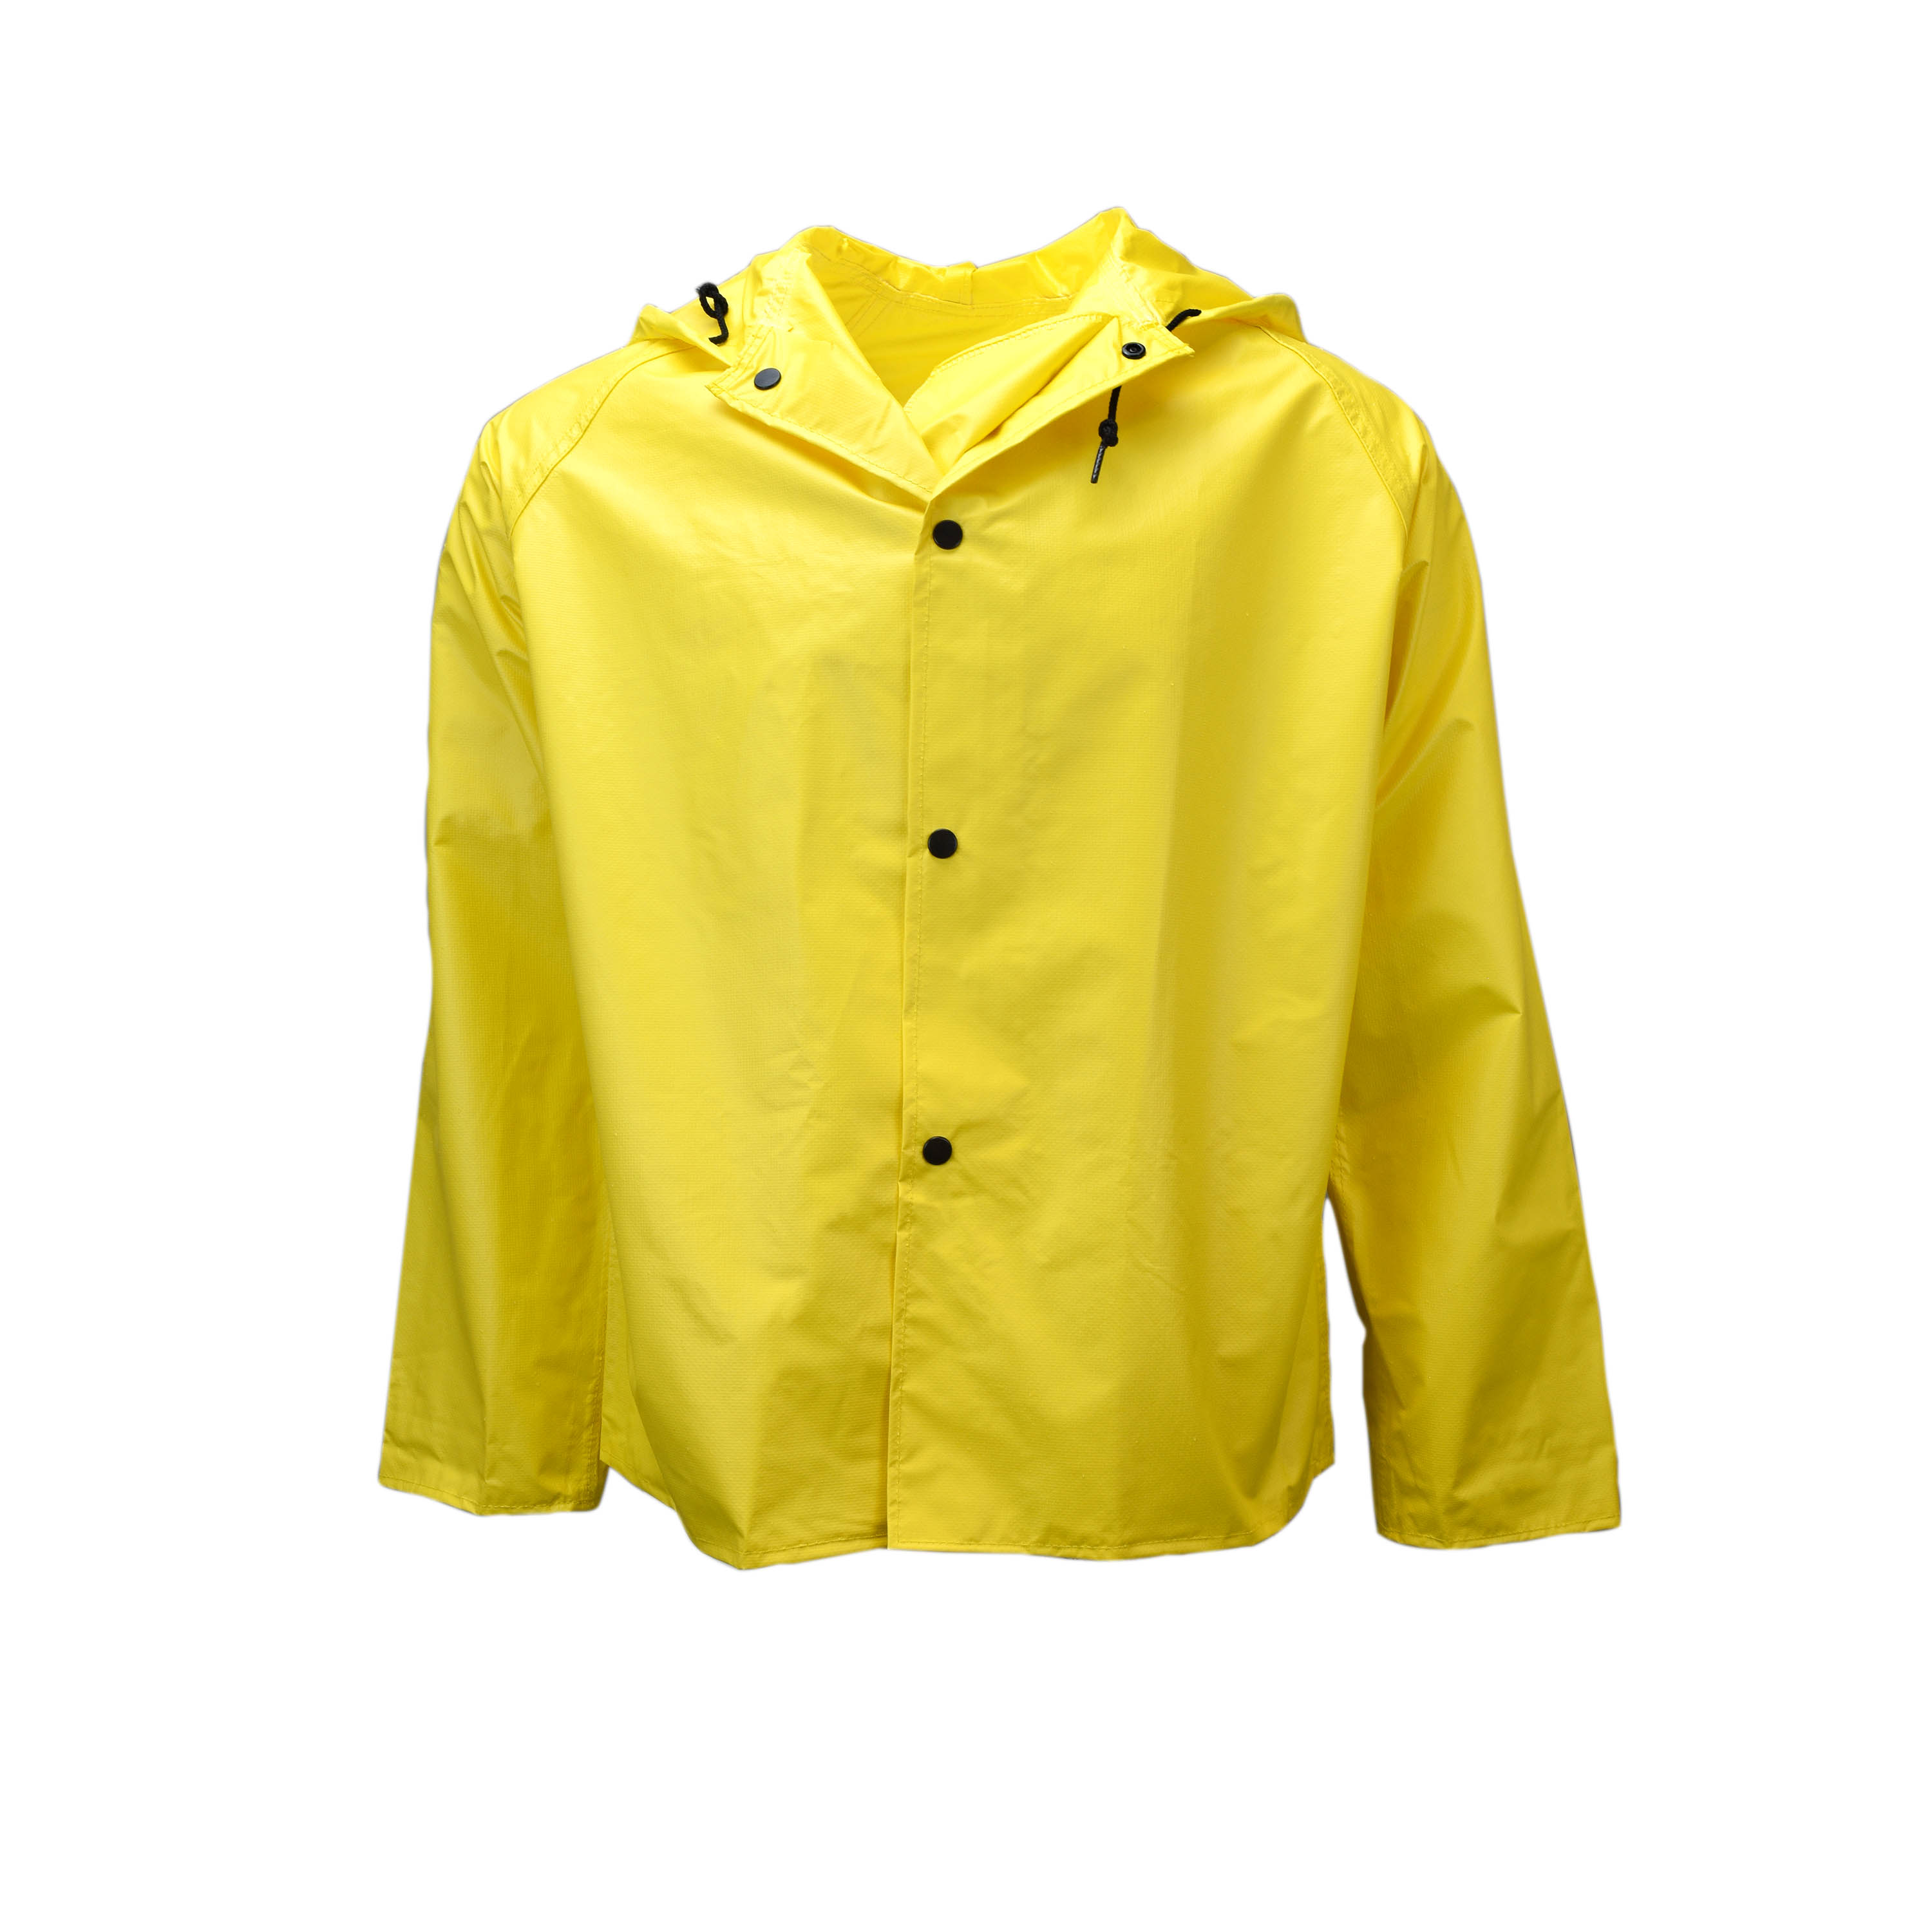 Universal 35 Jacket with Hood - Safety Yellow - Size 5X - Rain Suits